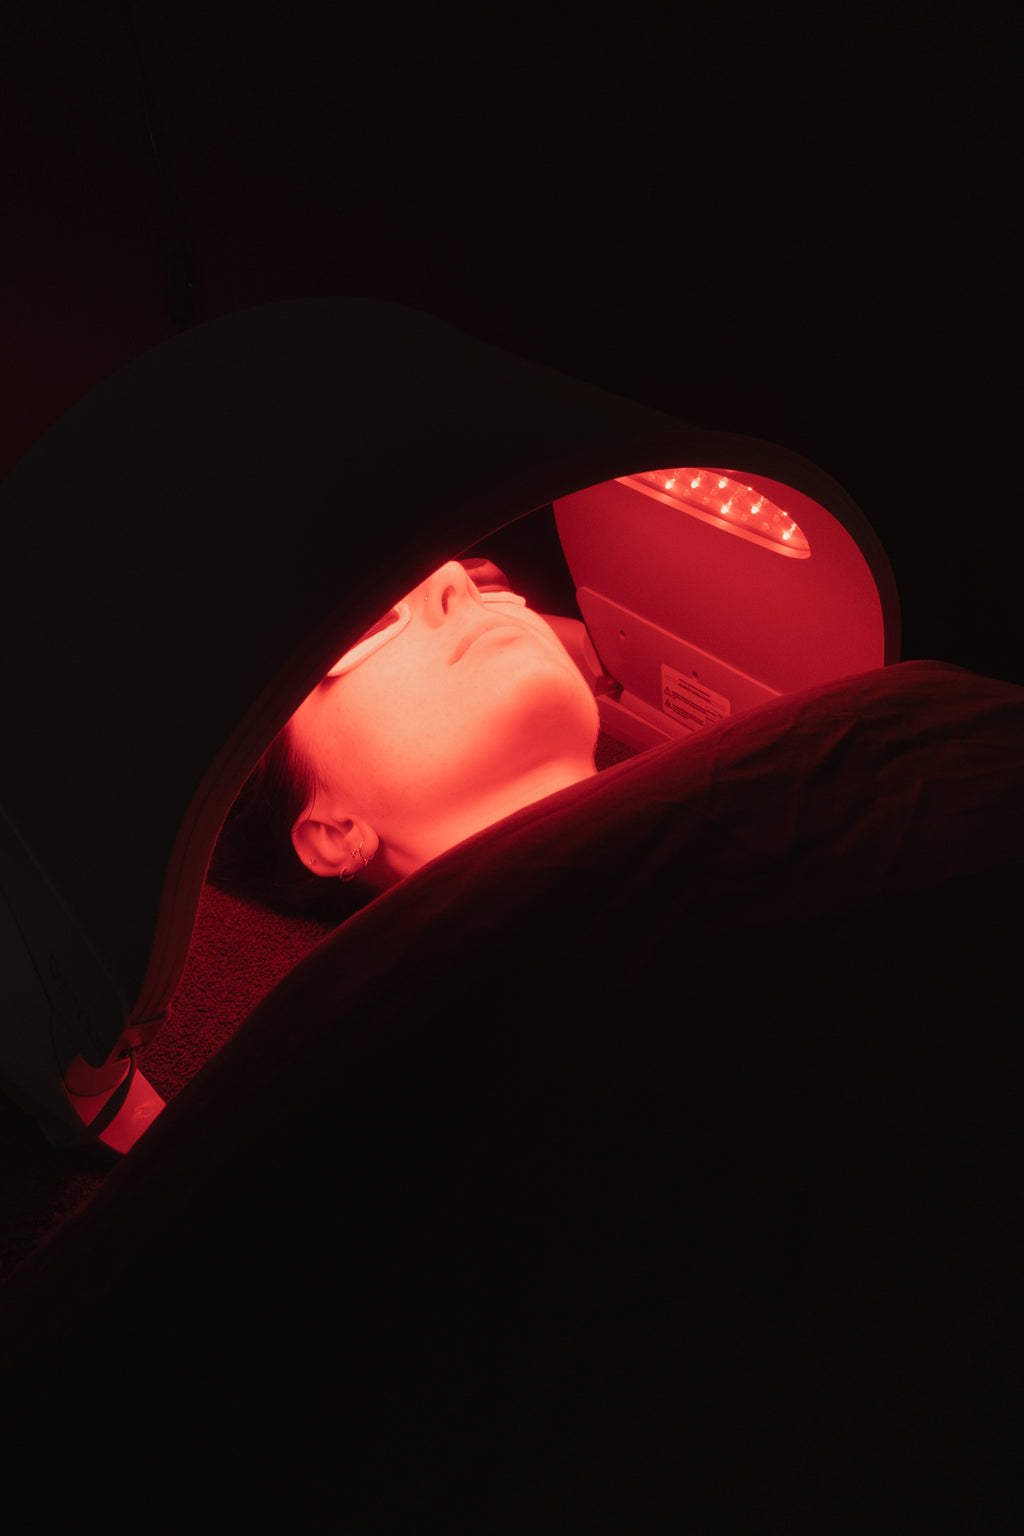 LED light therapy | an incredible non invasive treatment. Relax while the light therapy mask works it's magic.